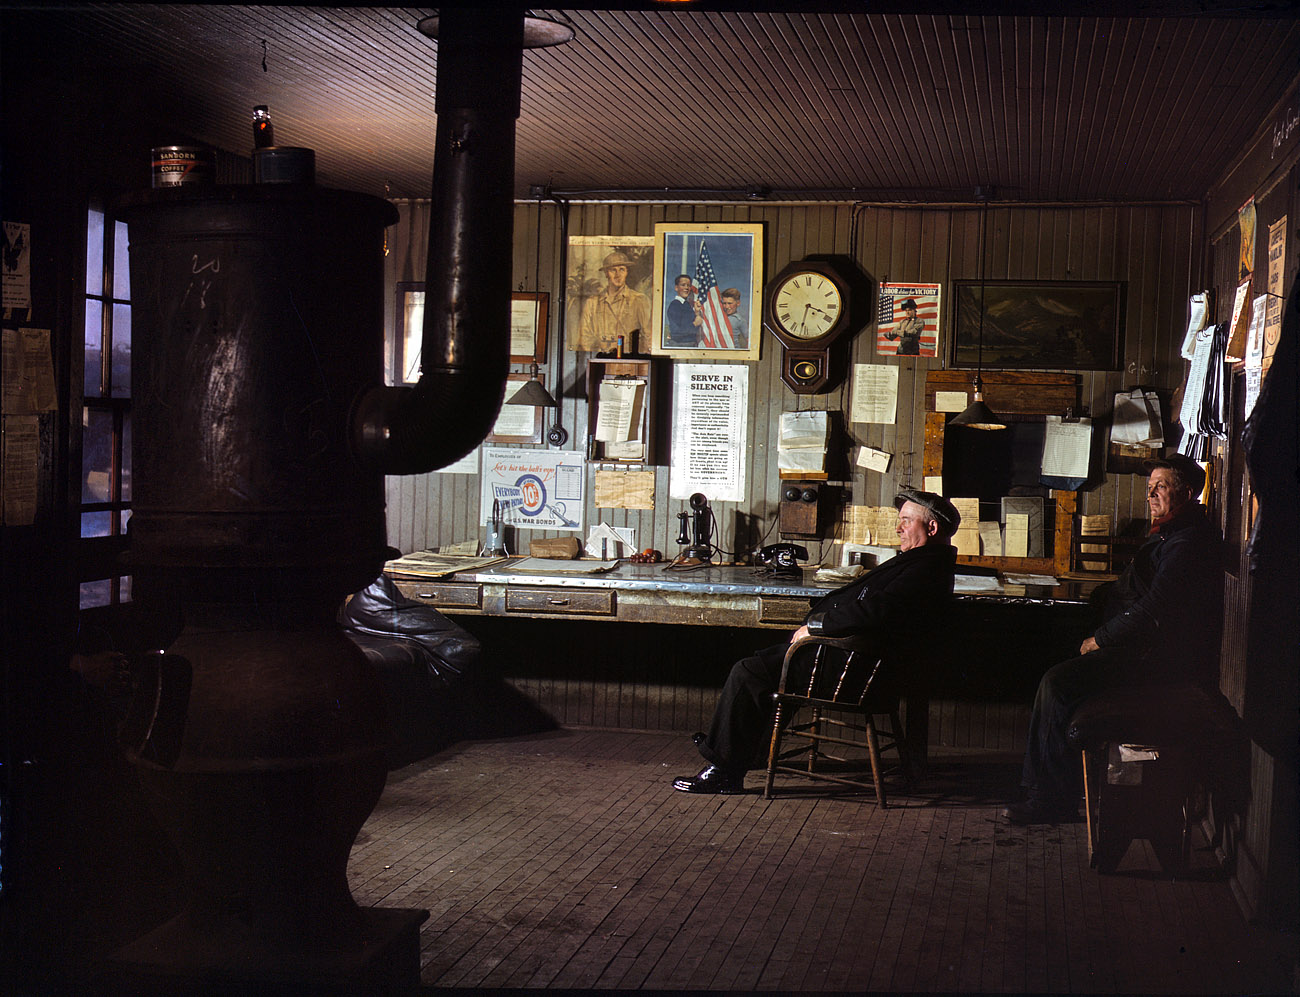 December 1942. A winter afternoon in the North Proviso yardmaster's office, Chicago & North Western Railroad. View full size. 4x5 Kodachrome transparency by Jack Delano. Click here for a closeup of the poster on the wall.